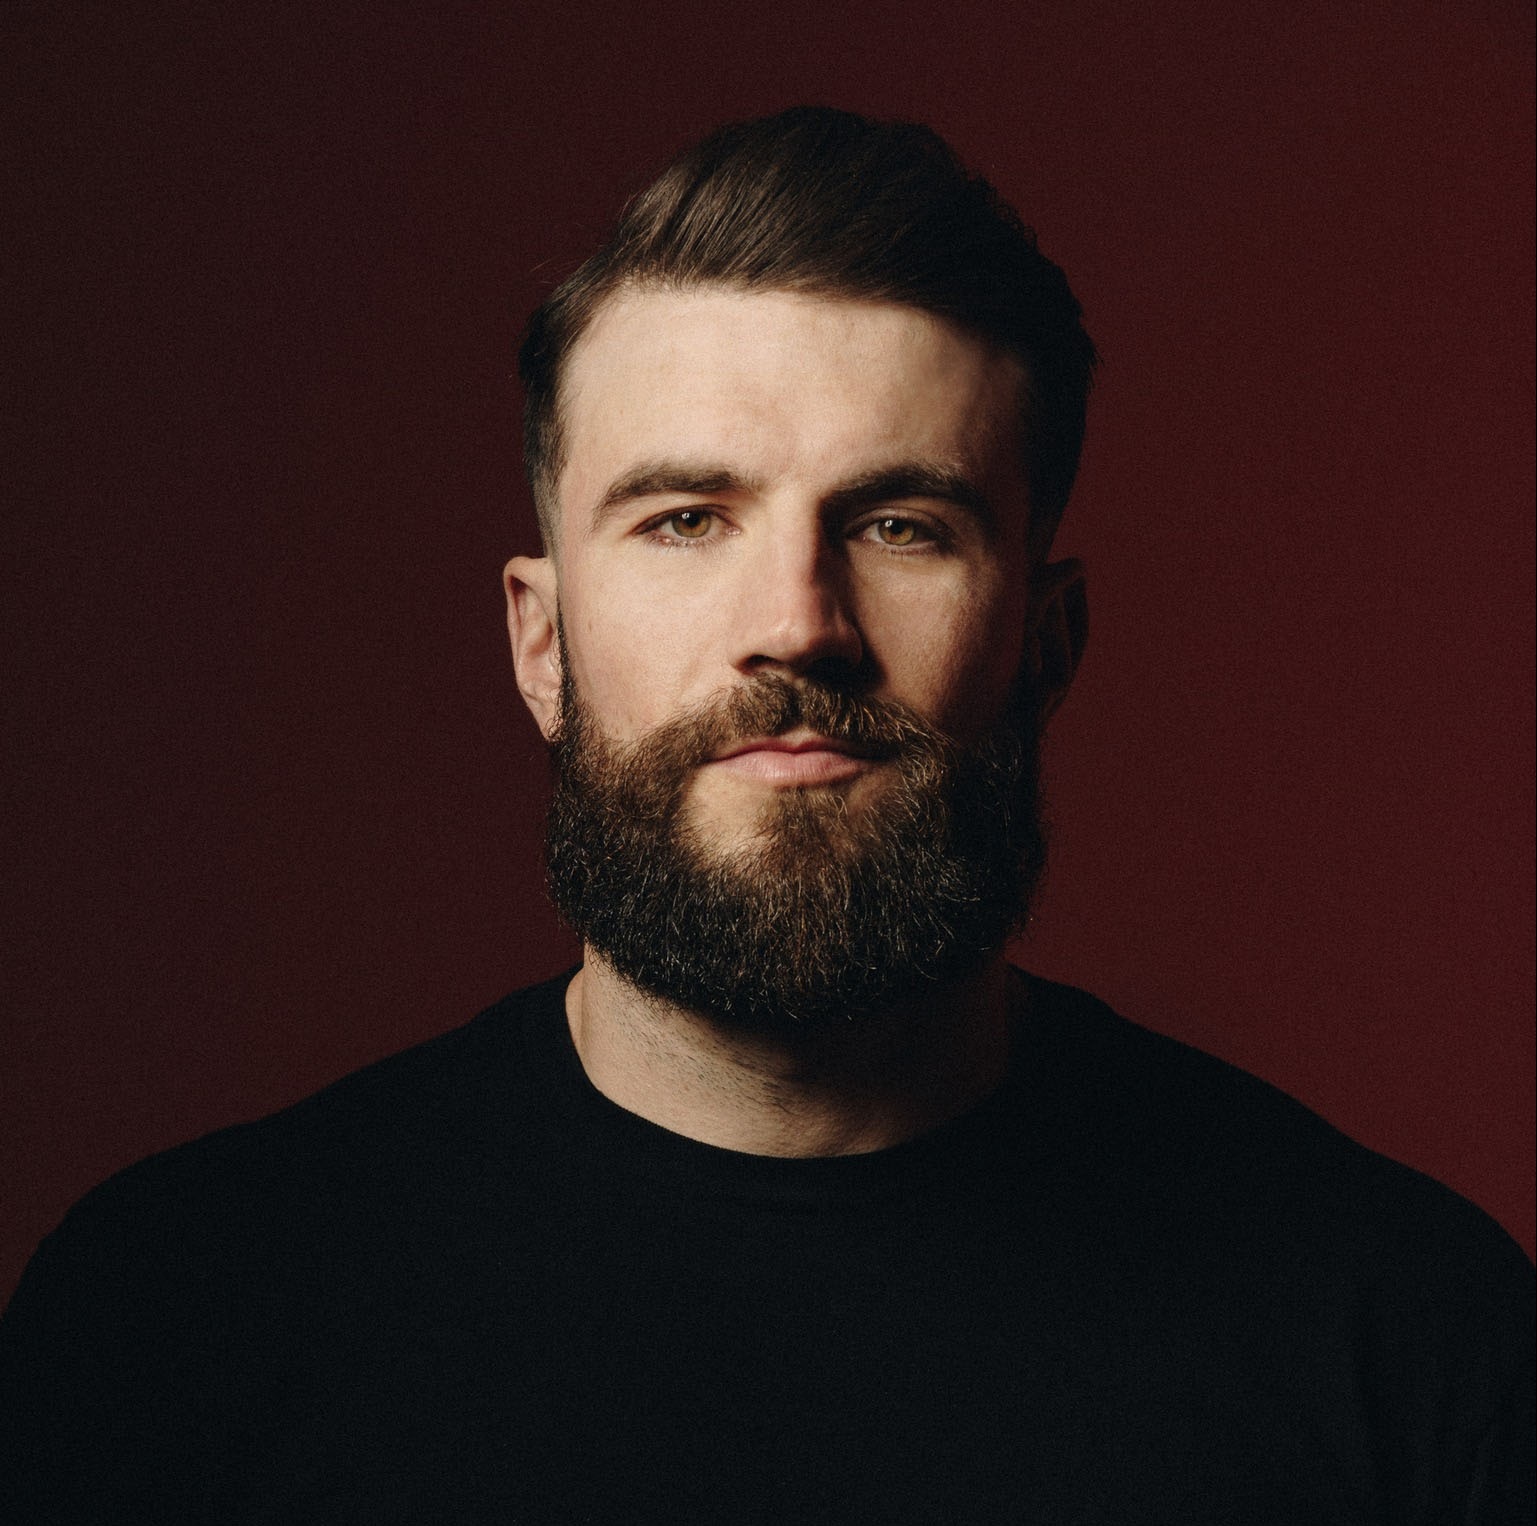 SAM HUNT HUMBLED BY REACTION TO ‘BODY LIKE A BACK ROAD.’